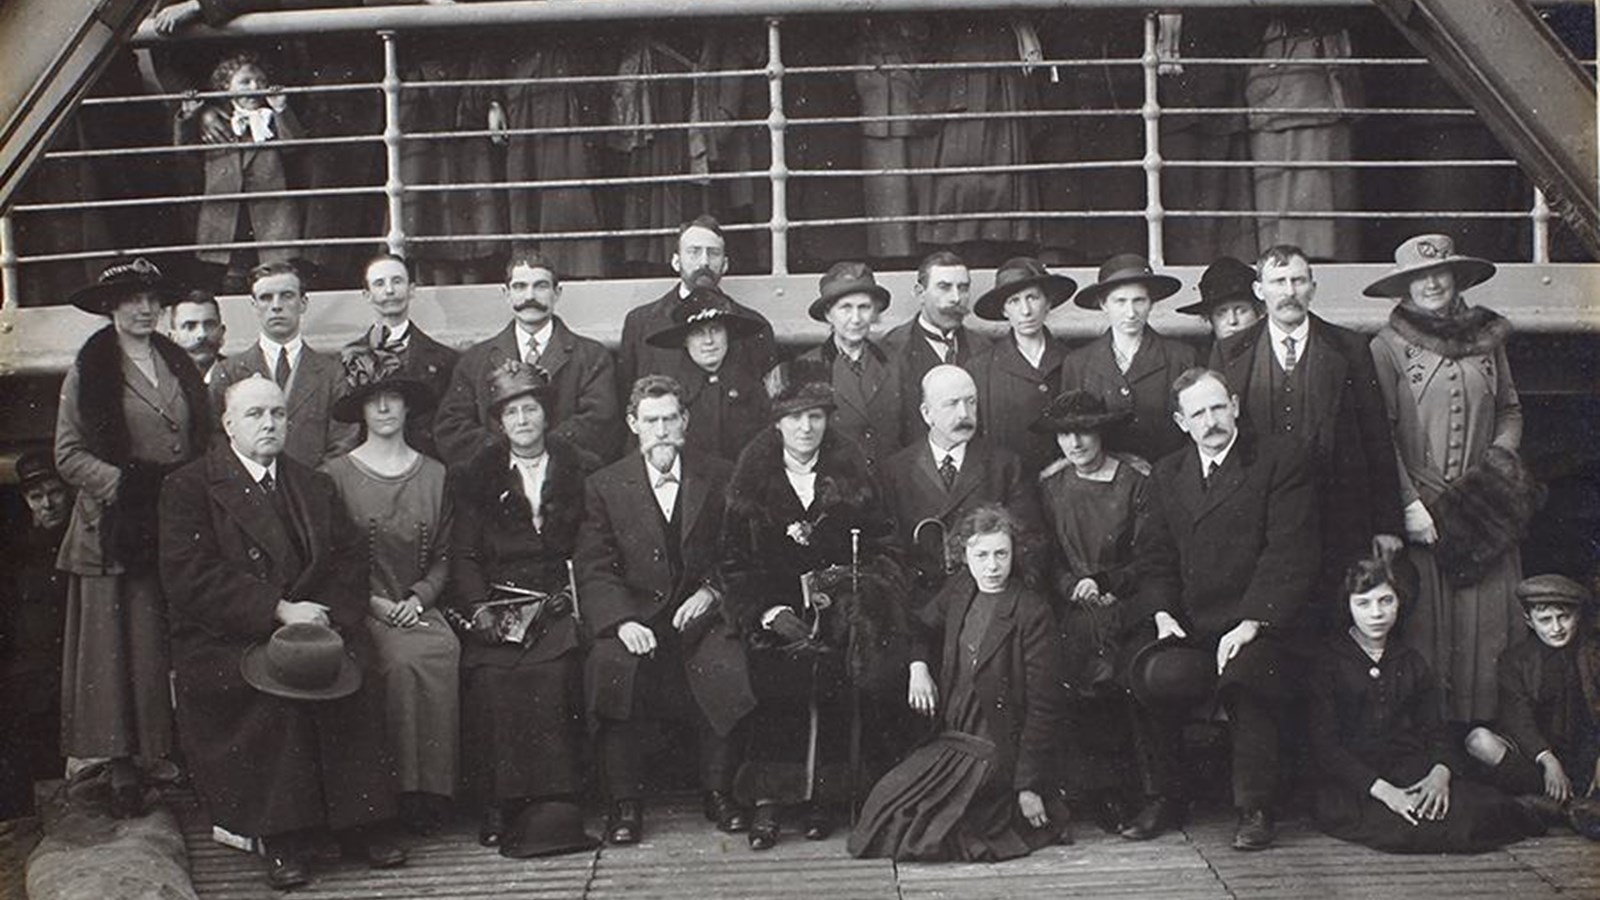 A black and white photo of several Belgian Refugees on a SS Khyber ship with members of the Belgian Relief Committee in 1919